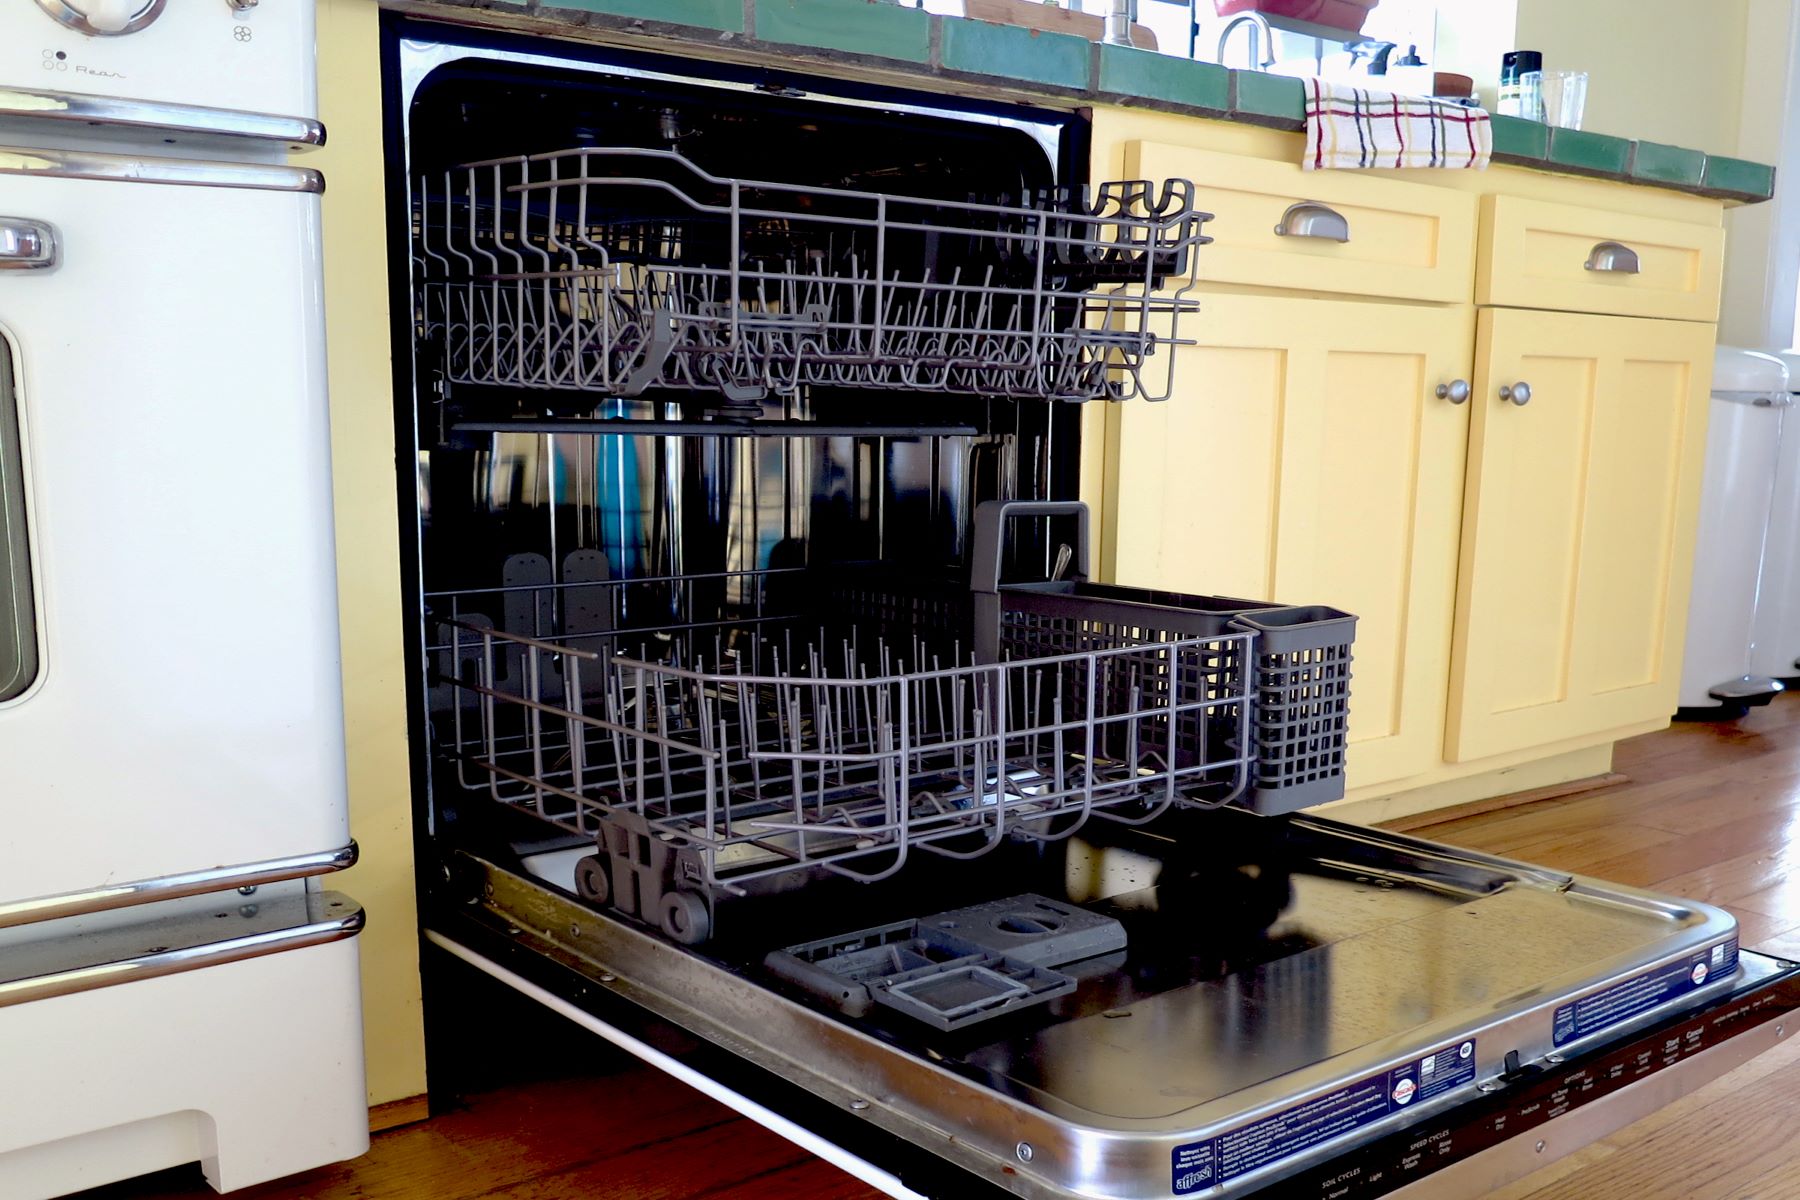 Say Goodbye To Black Mildew In Your Dishwasher With These Creative Solutions!